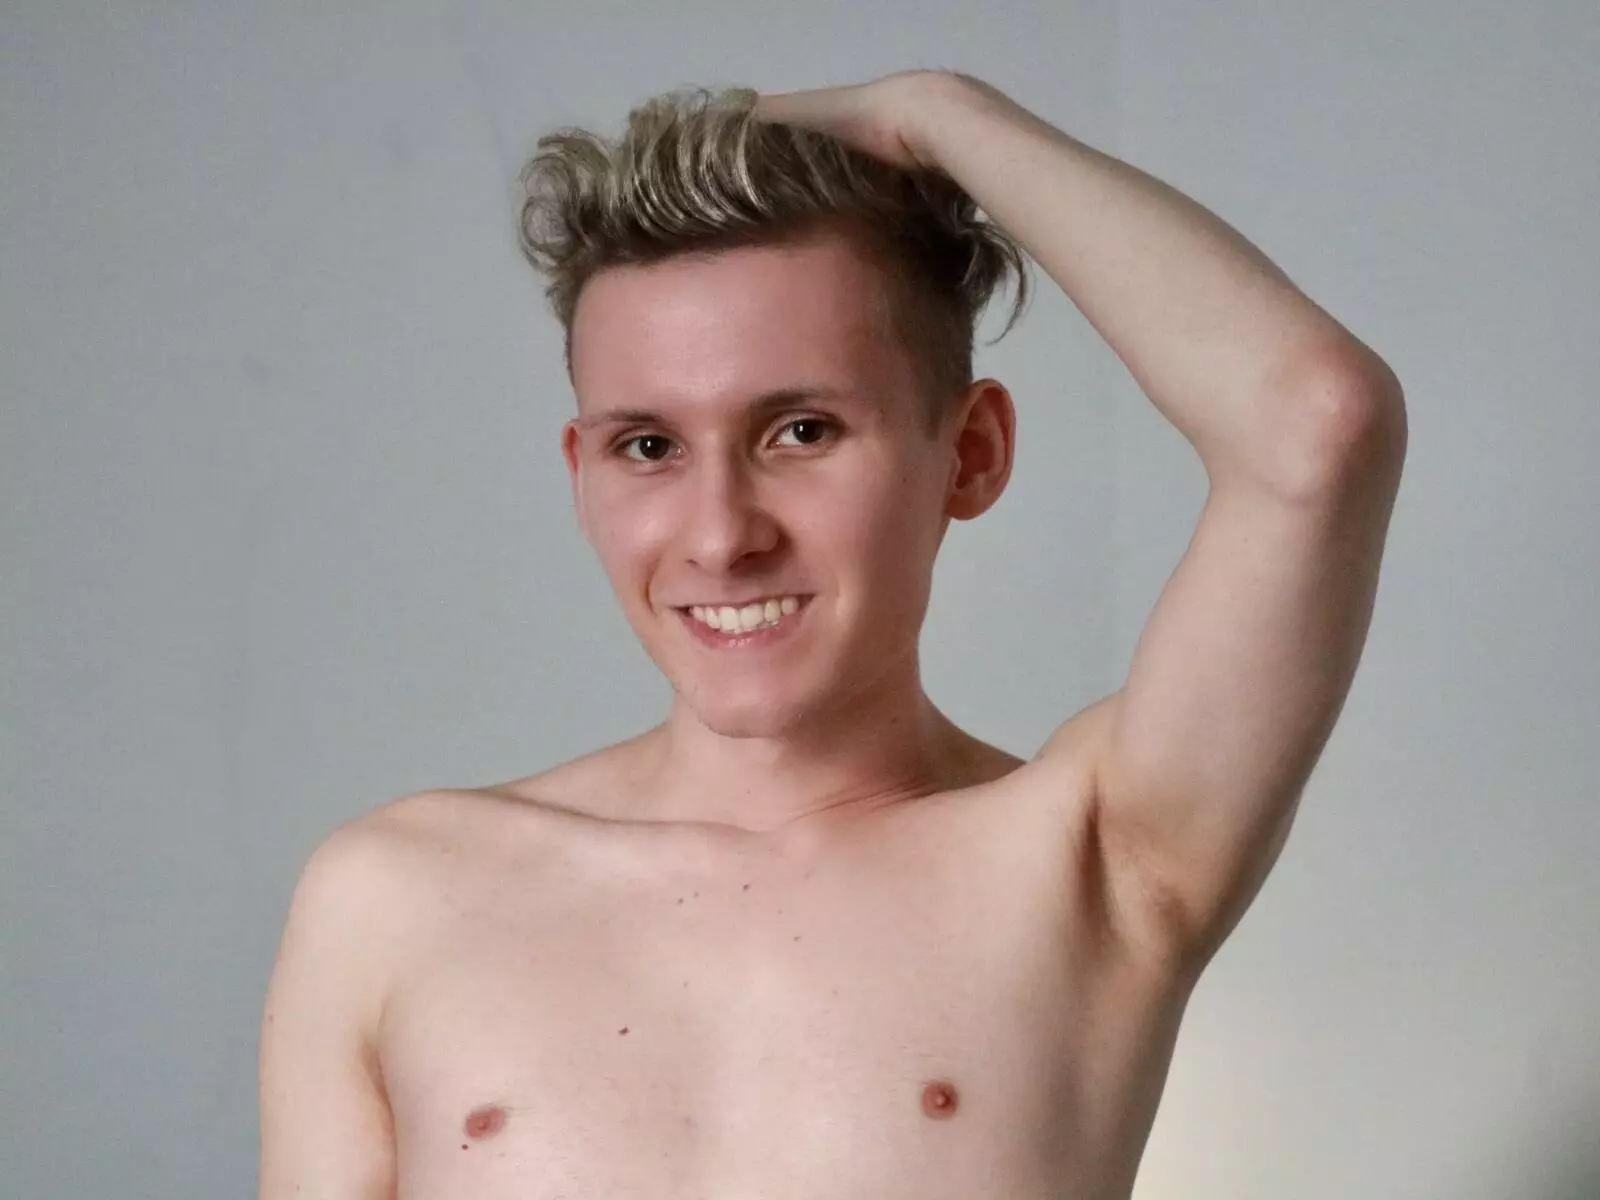 View more of fantasytwink